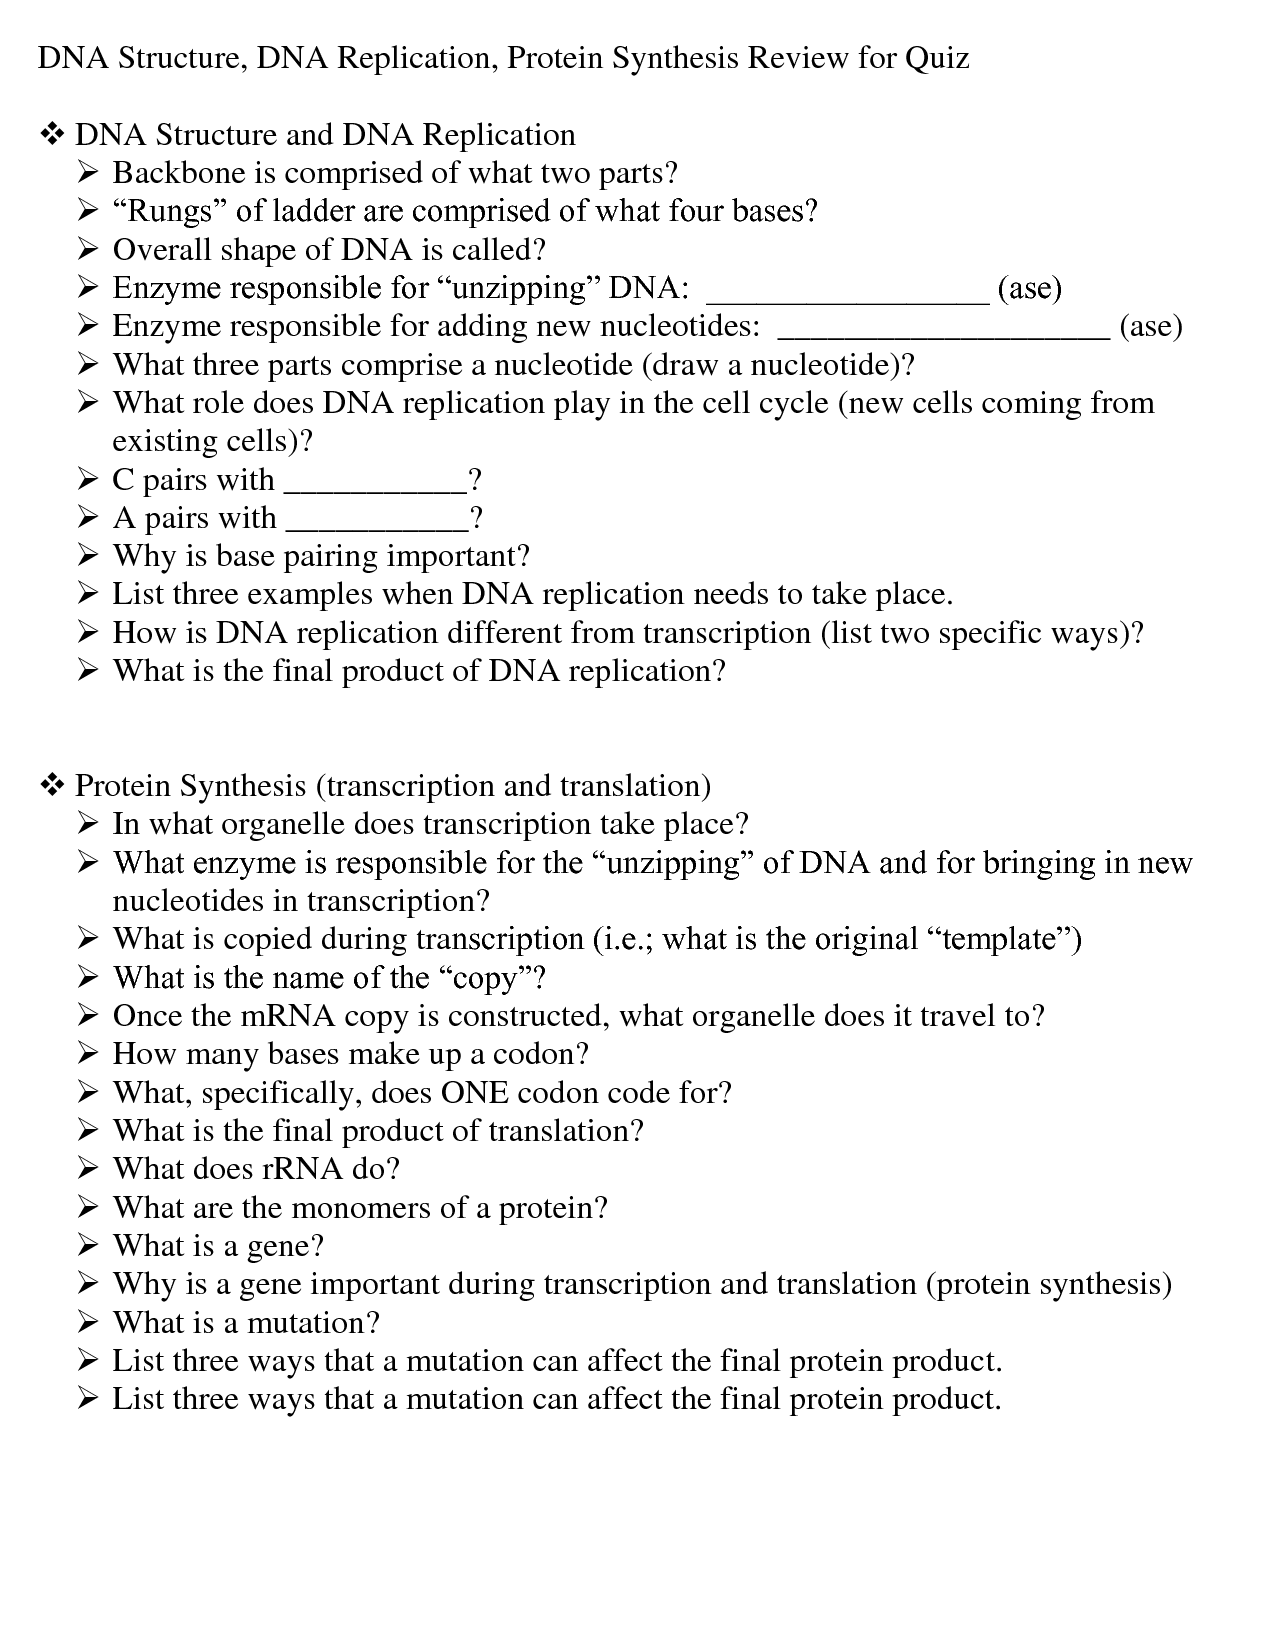 DNA Structure and Replication Worksheet Answer Key Image